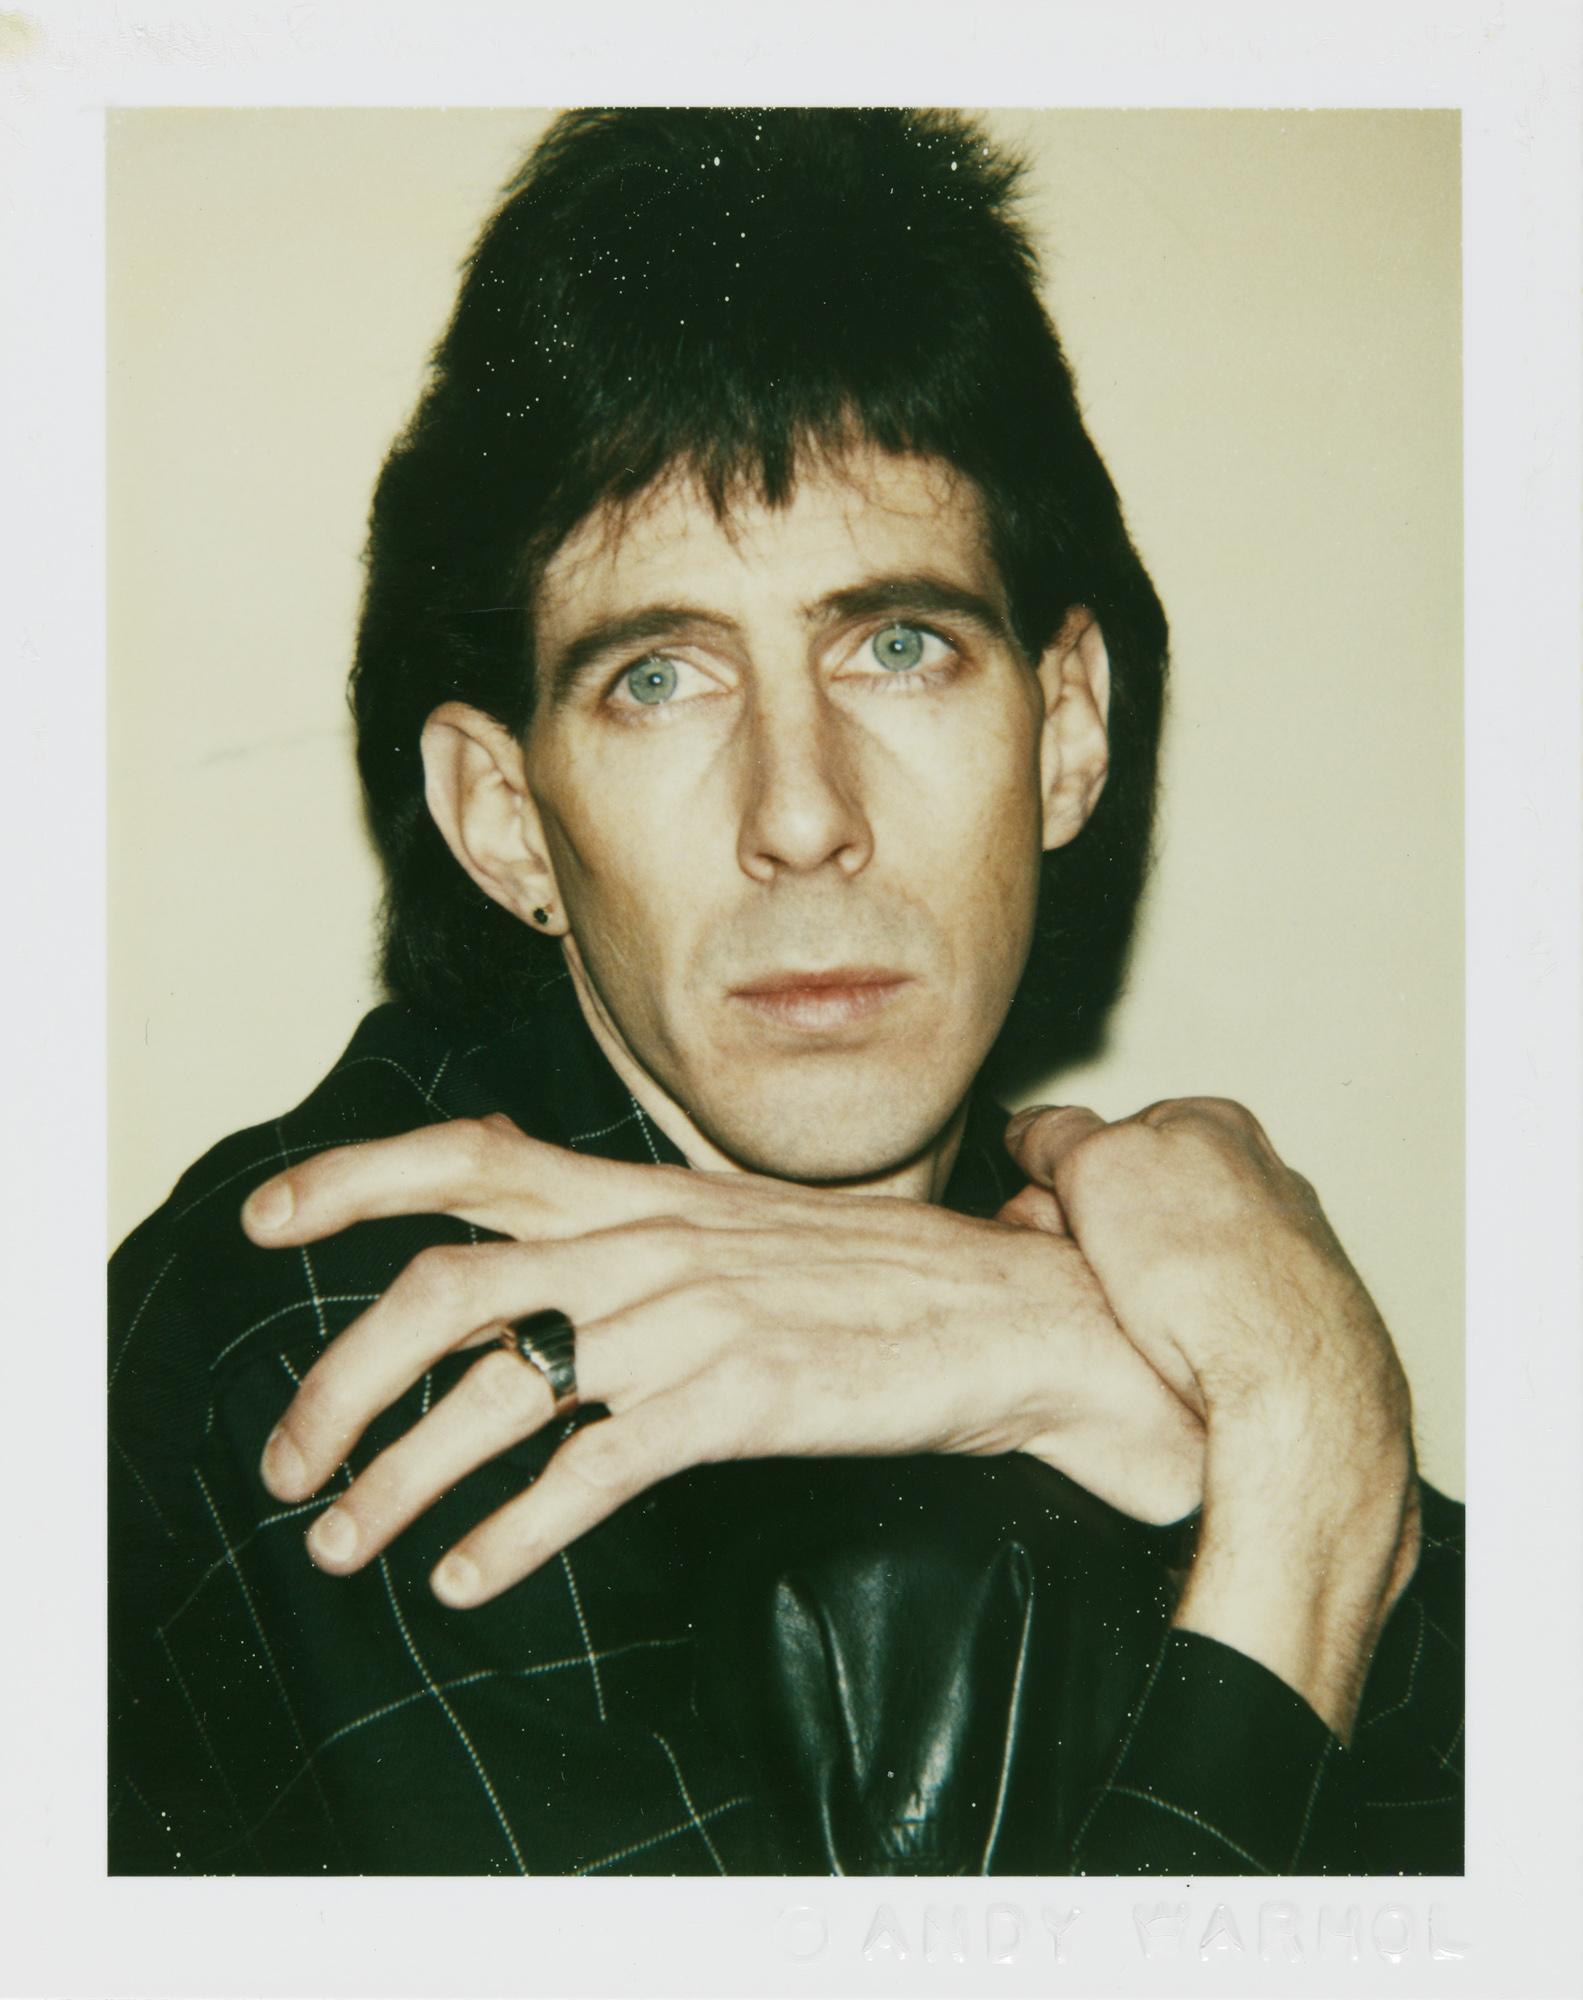 Color Polaroid of Ric Ocasek from The Cars by Andy Warhol